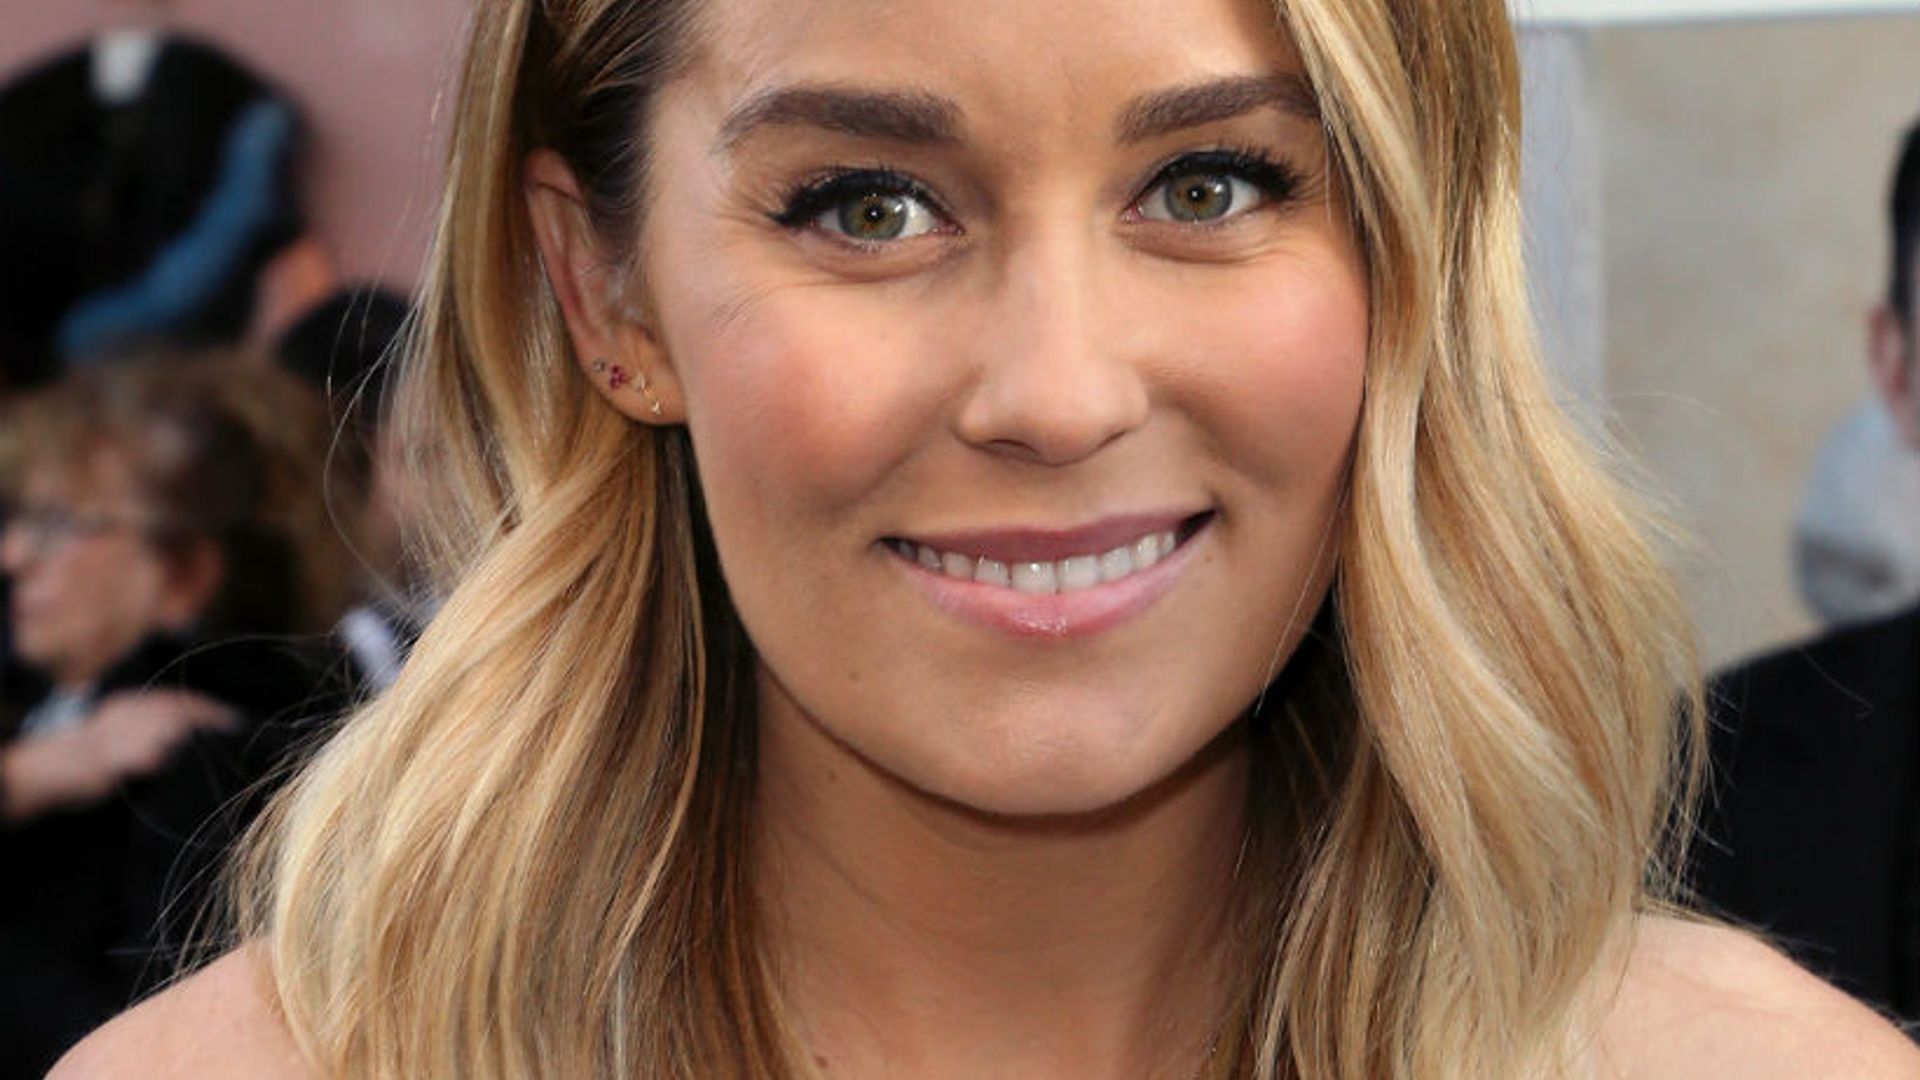 Lauren Conrad sets up holiday shop in time for Christmas